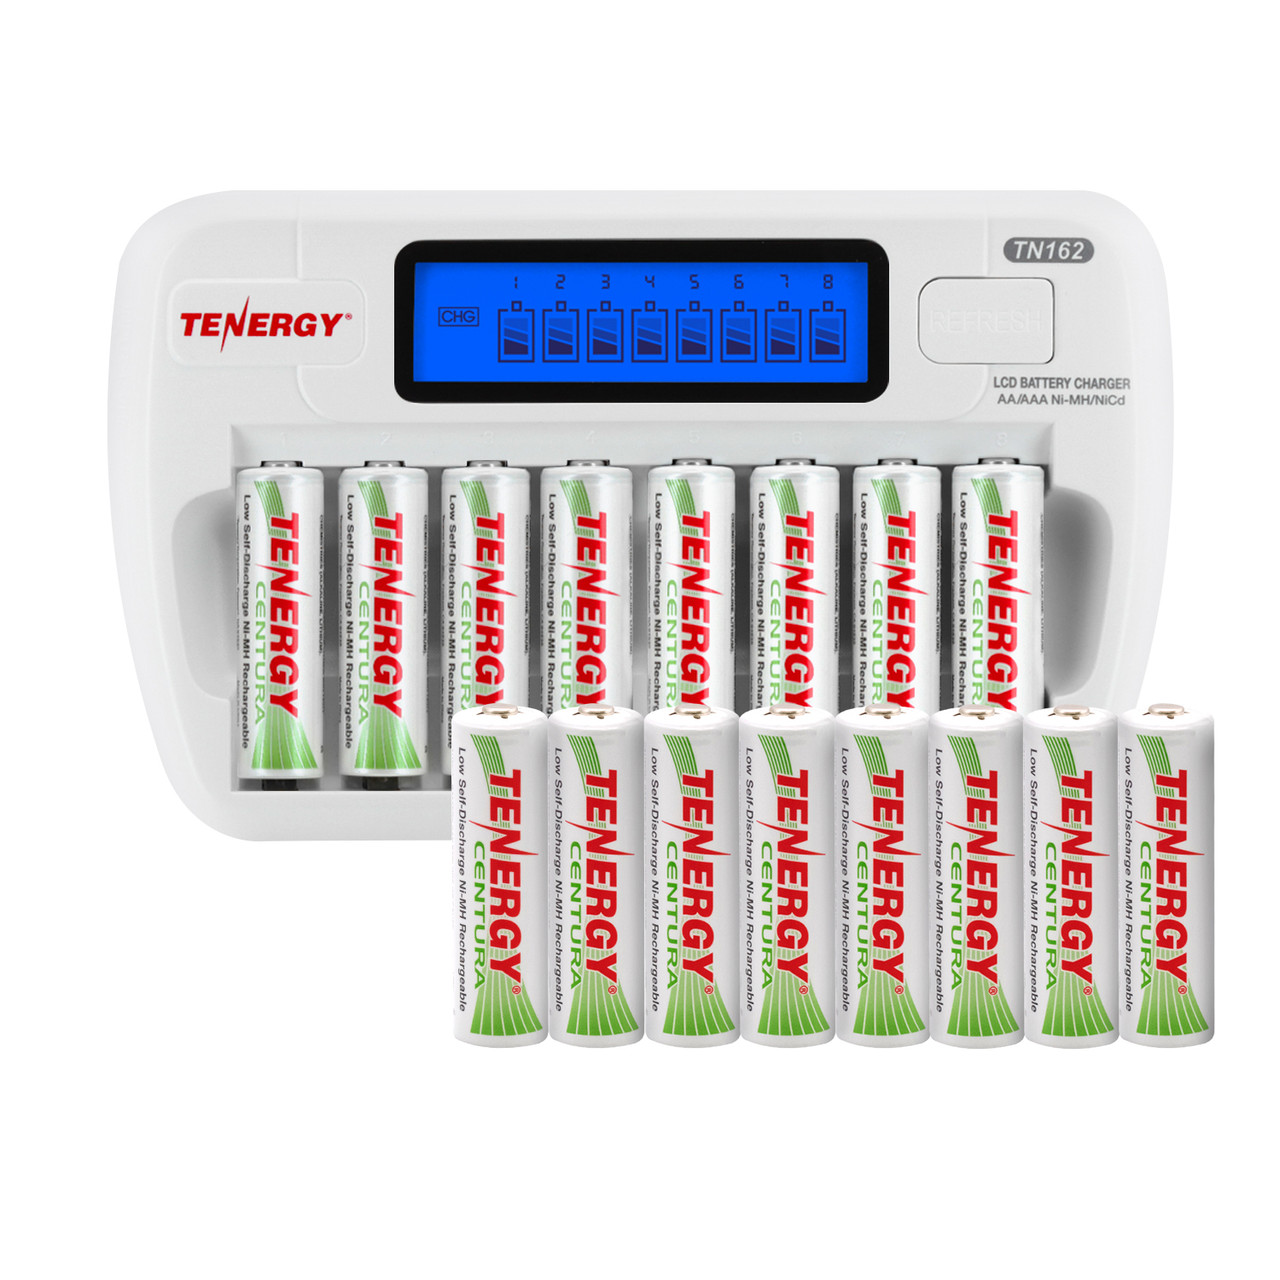 Tenergy Centura AA NiMH Rechargeable Batteries (16pk) w/ Charger Tenergy